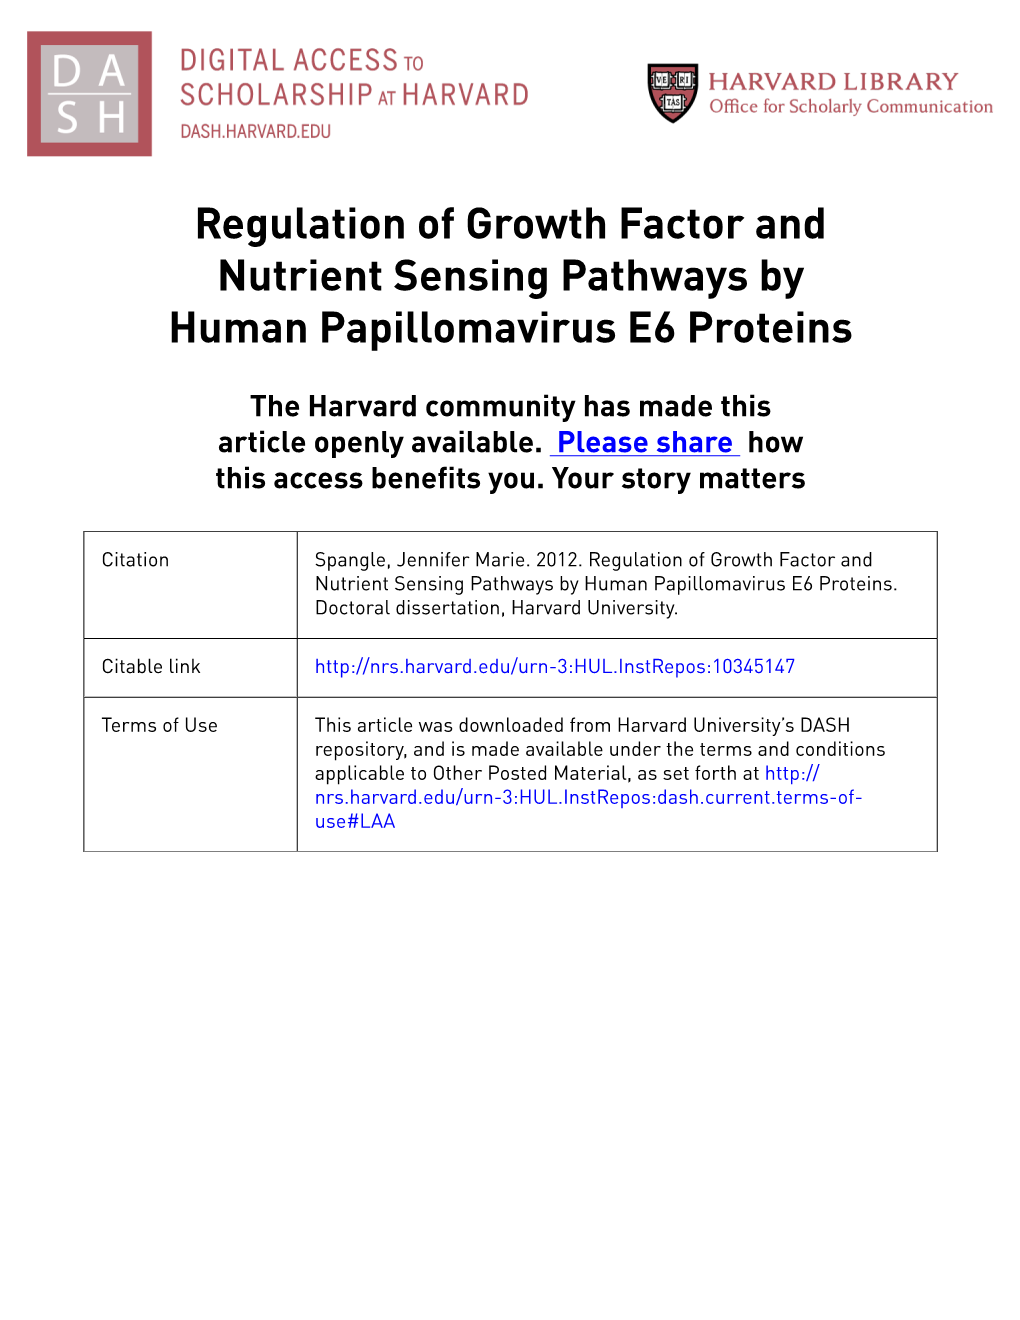 Regulation of Growth Factor and Nutrient Sensing Pathways by Human Papillomavirus E6 Proteins